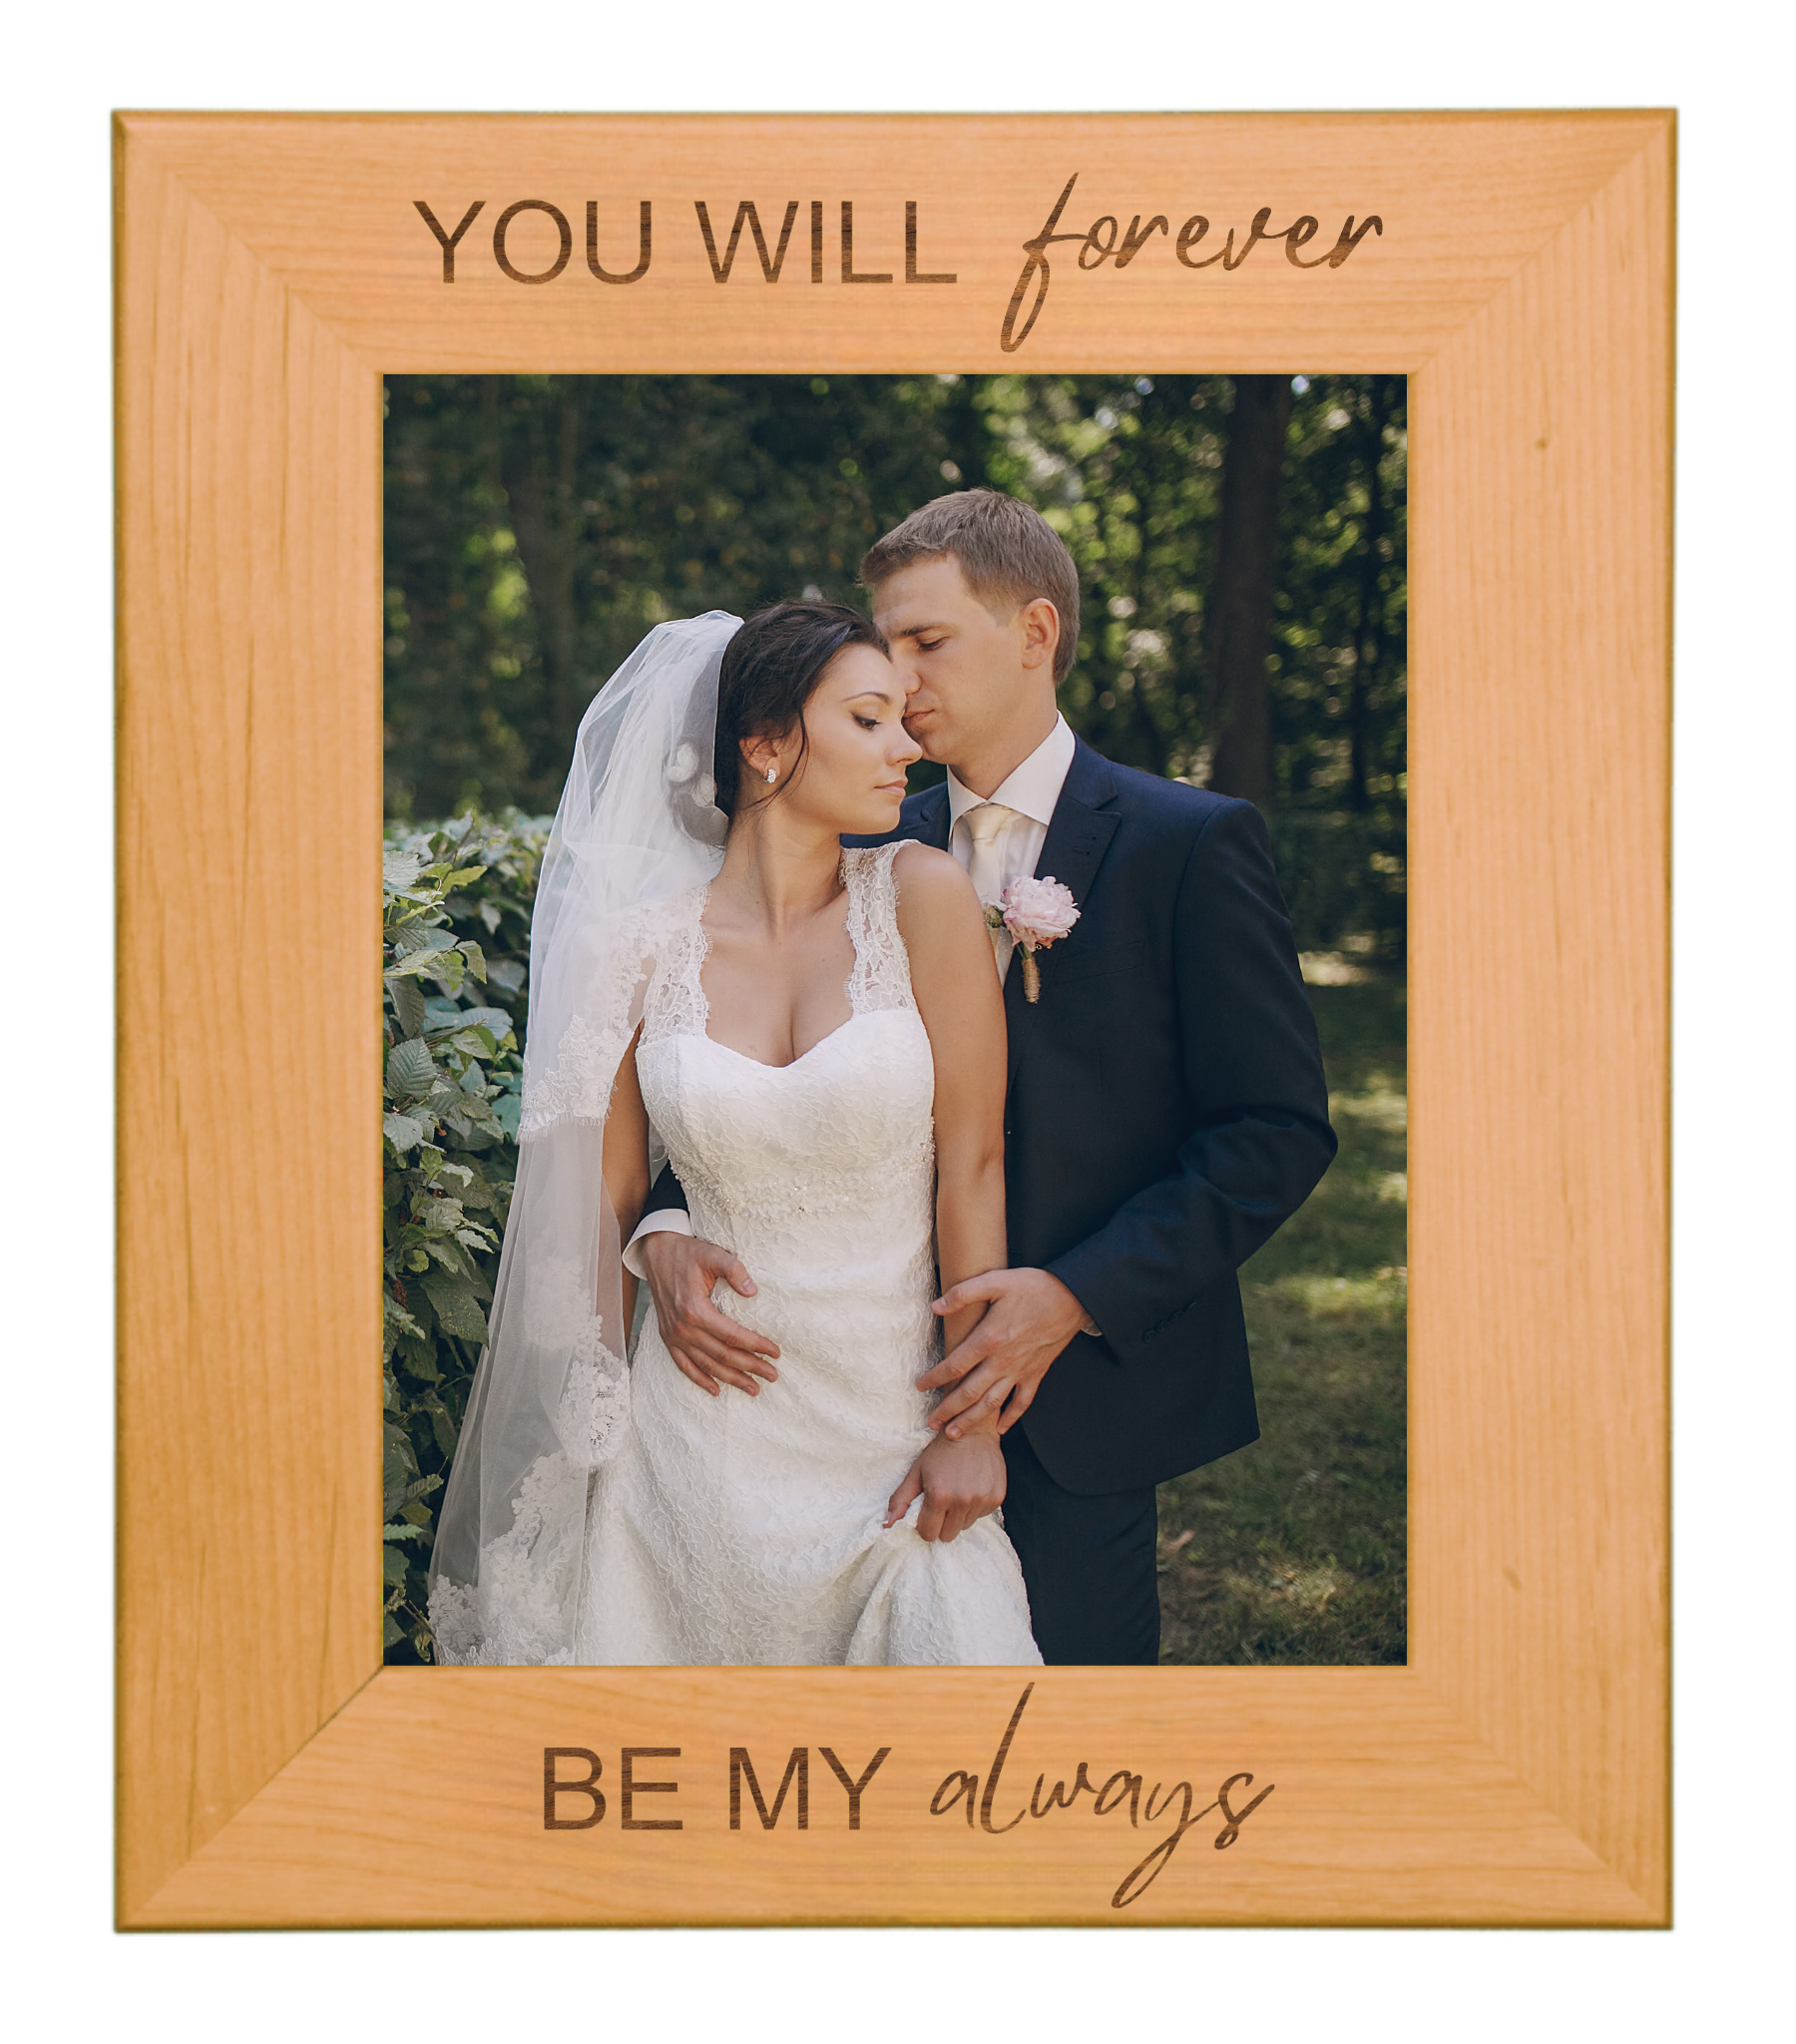 You will forever be my always - Wedding Personalized Wooden Photo Frame Custom Engraved - Red Alder Genuine Walnut Photo Frame